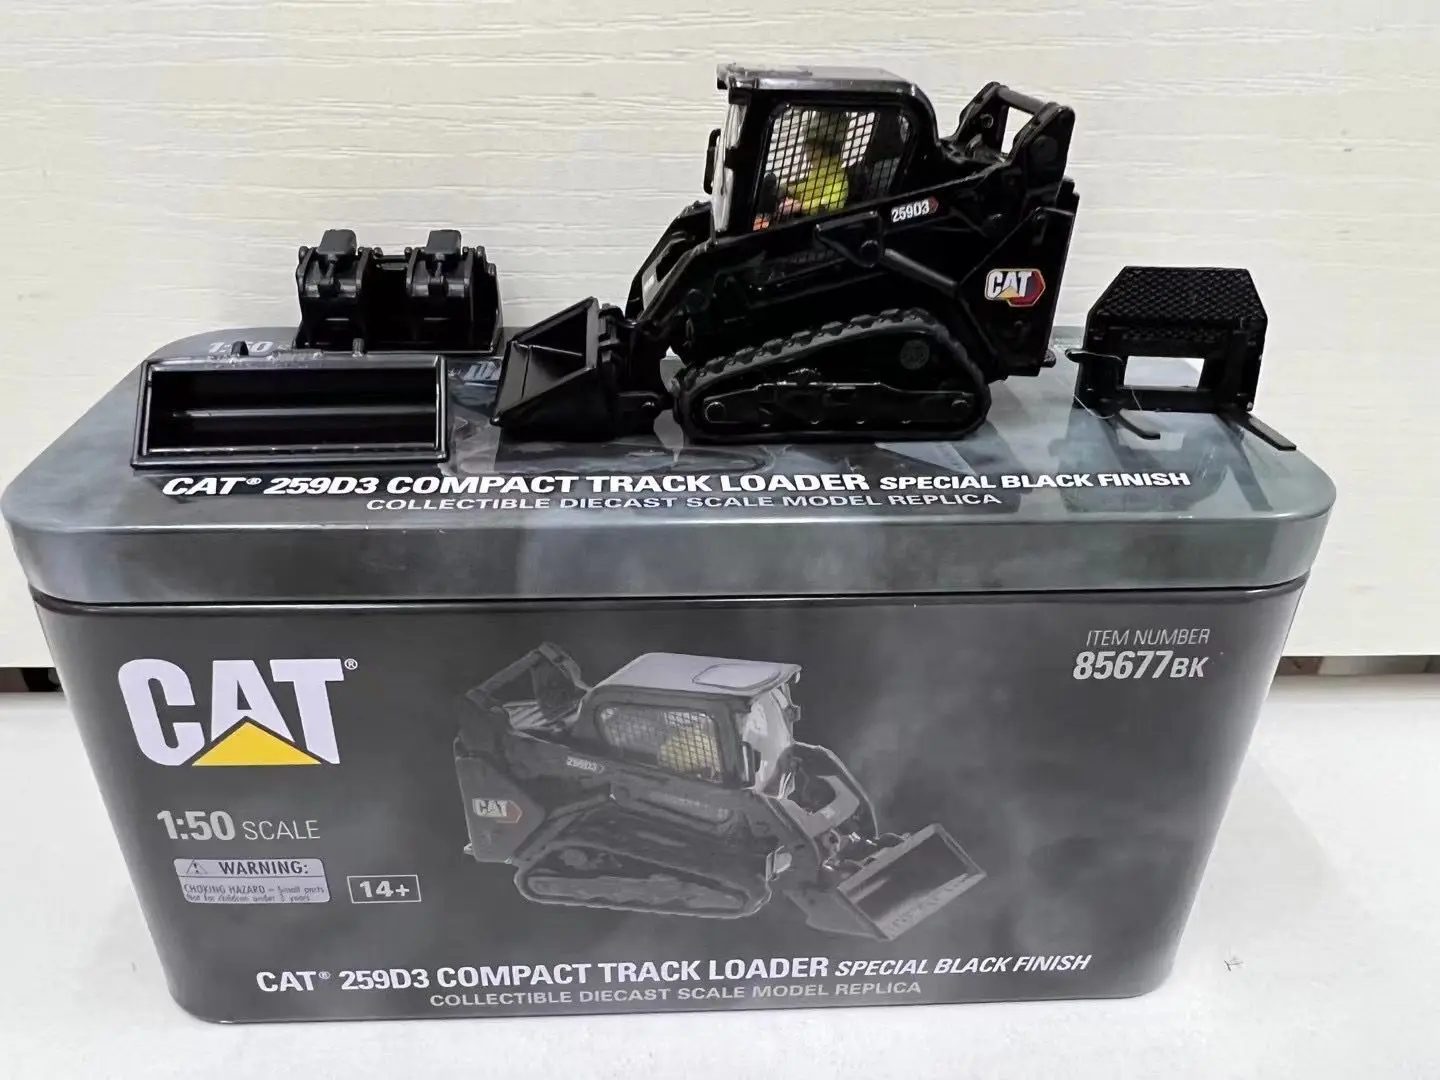 DieCast Masters Cat 259D3 Compact Track Loader Black 1/50 Scale Die-Cast Model Toy Gifts 85677BK